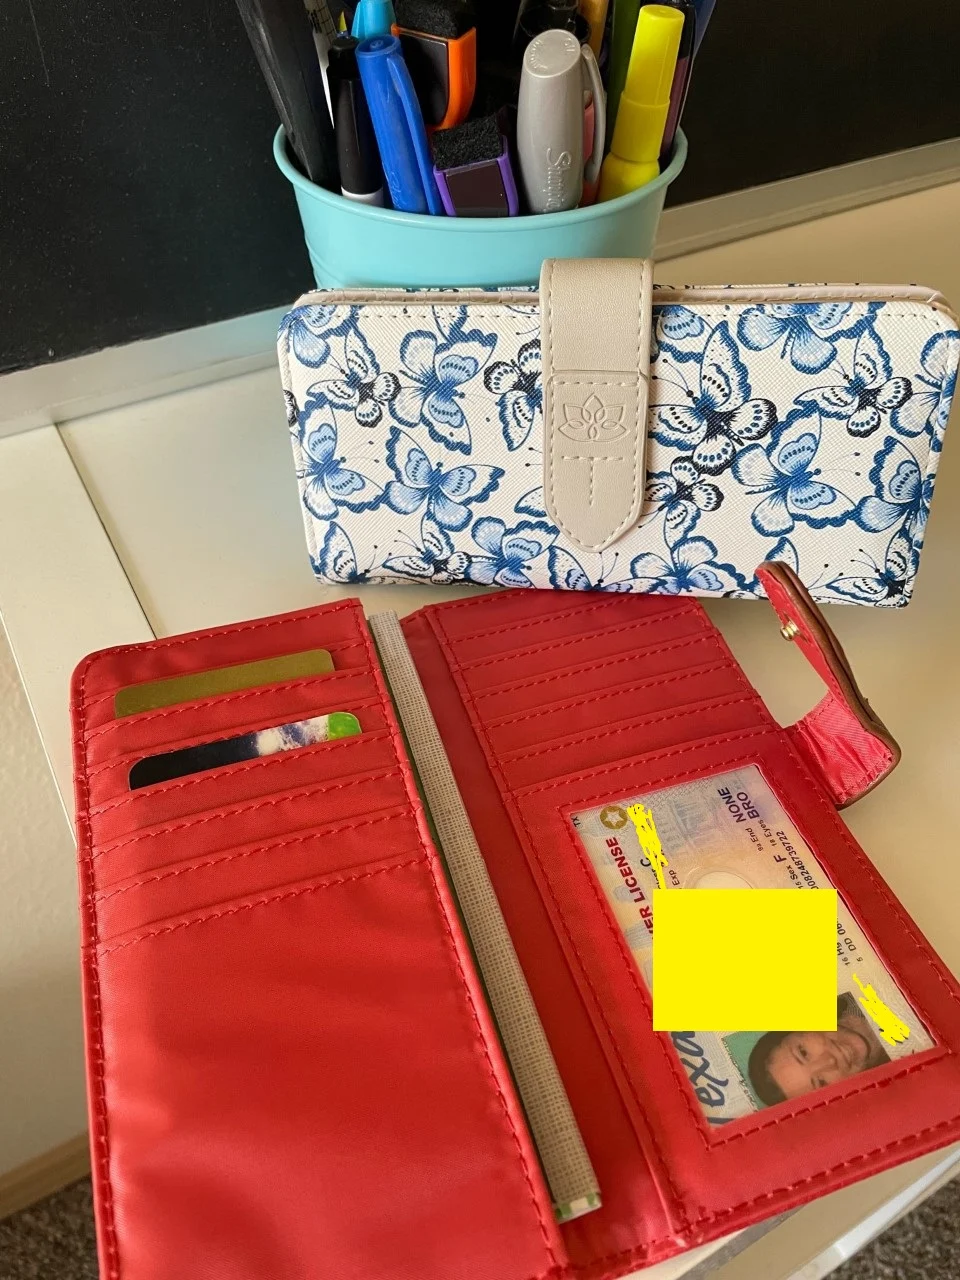 Alexandra Slim coral colored and blue and white butterfly colored wallets, with author's driver's license (sensitive info blurred out)